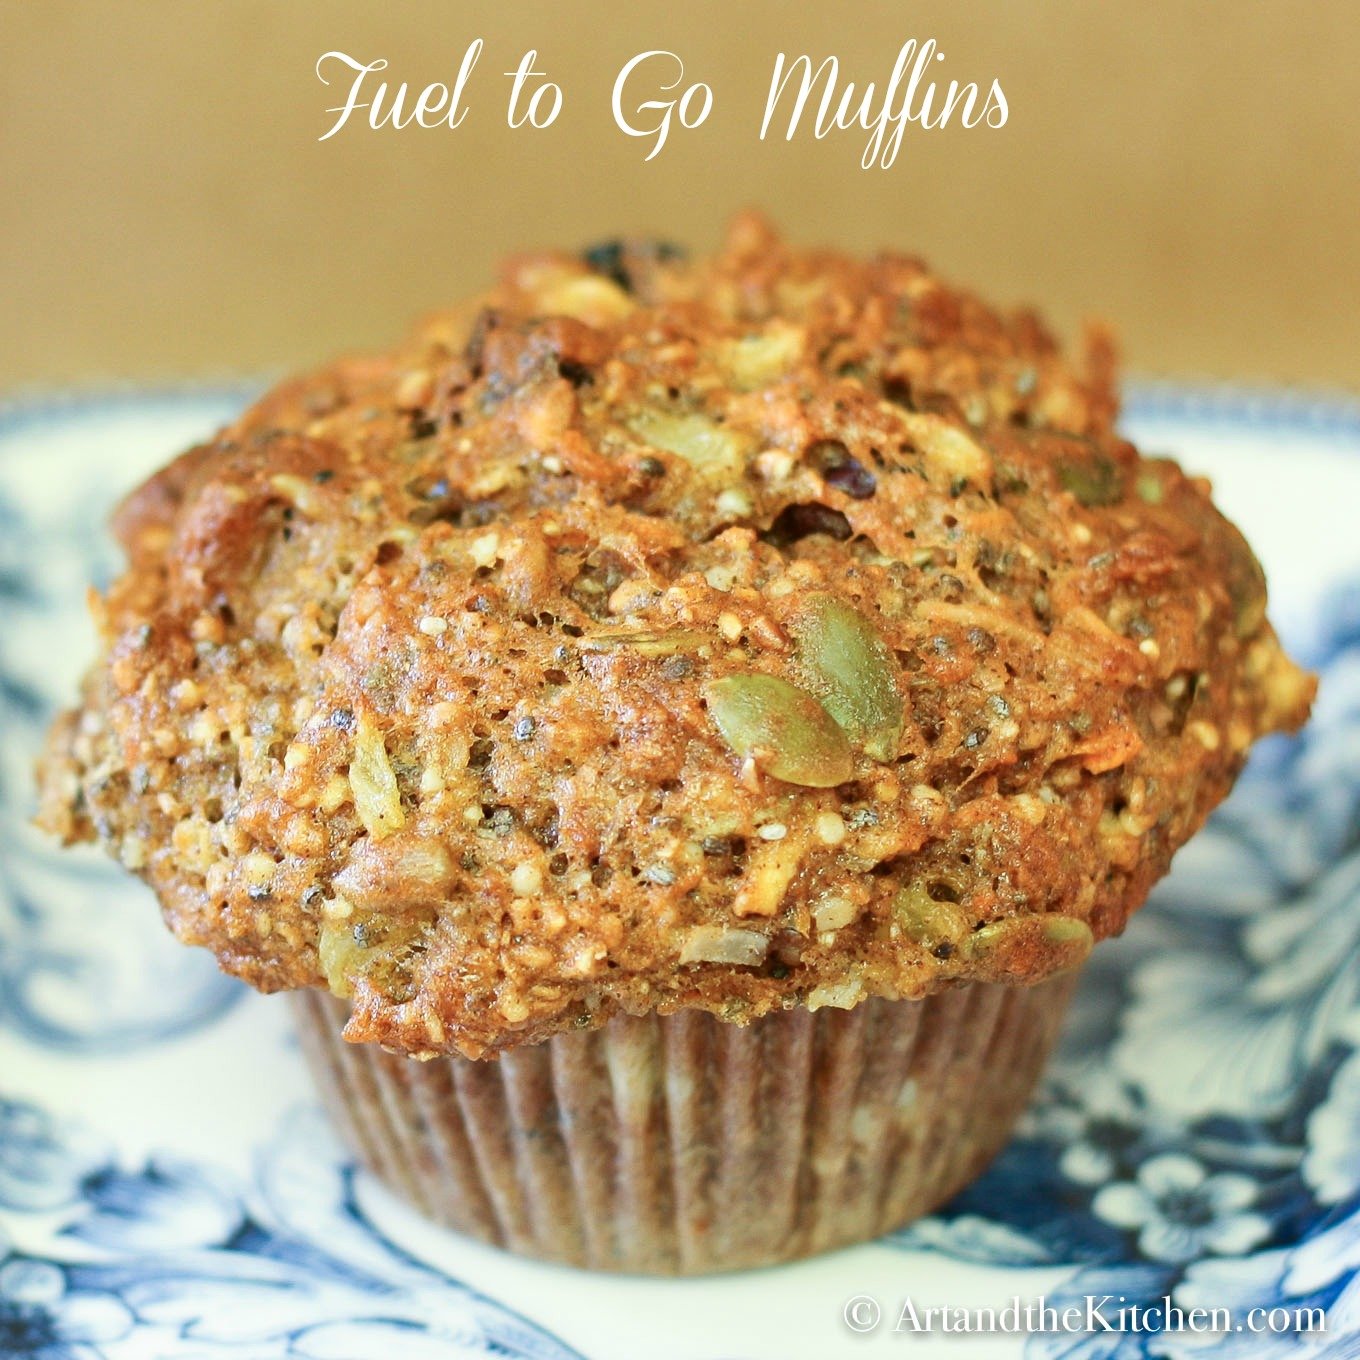 Muffin with pumpkin seeds, sunflower seed and whole grain on decorative blue plate.